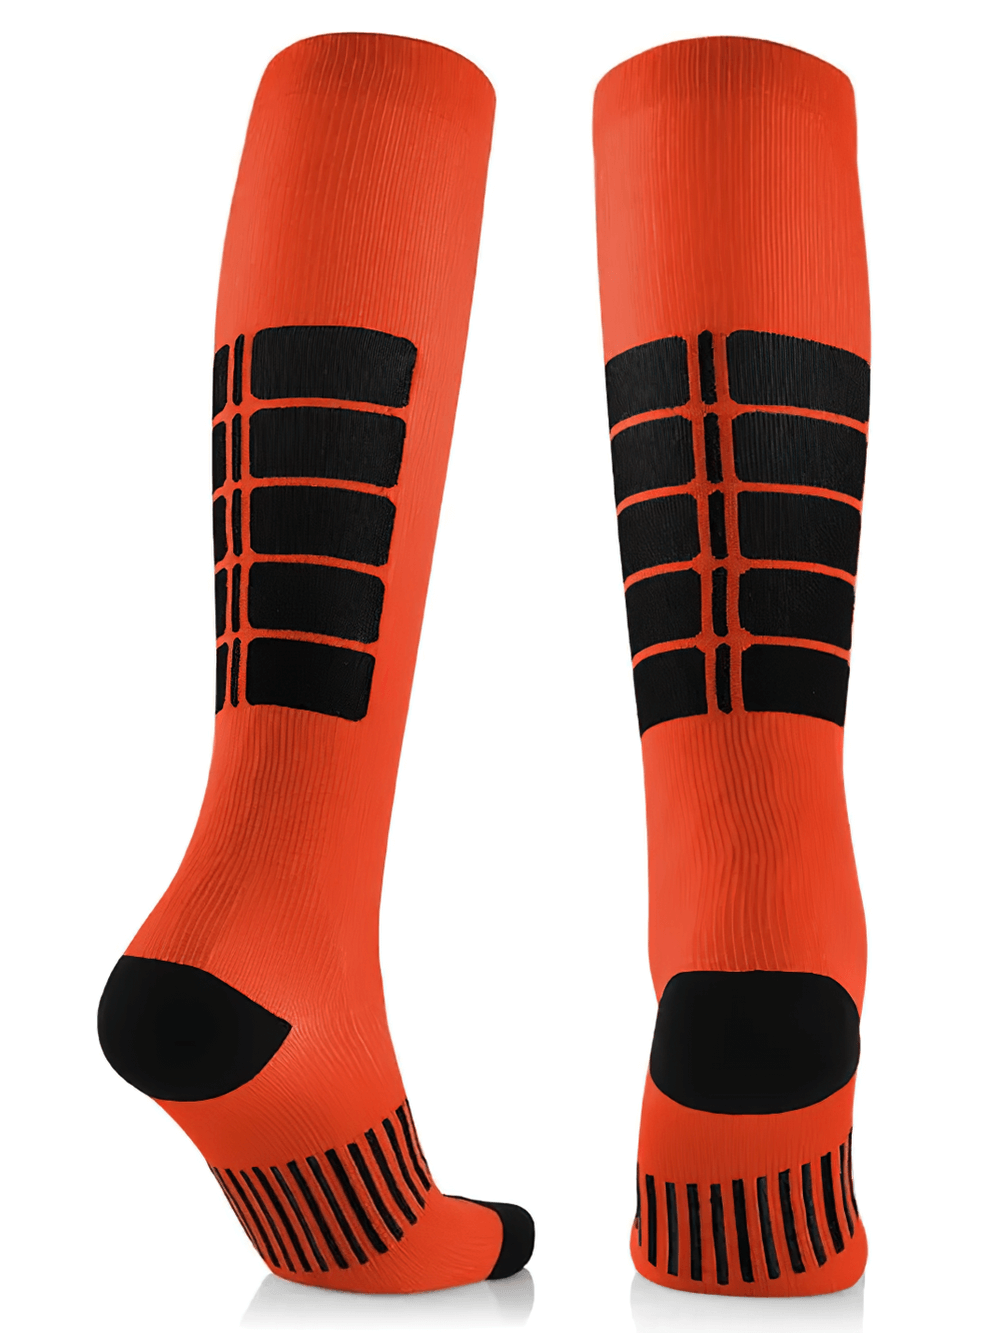 Knee-High Sports Socks for Cycling and Running - SF2238